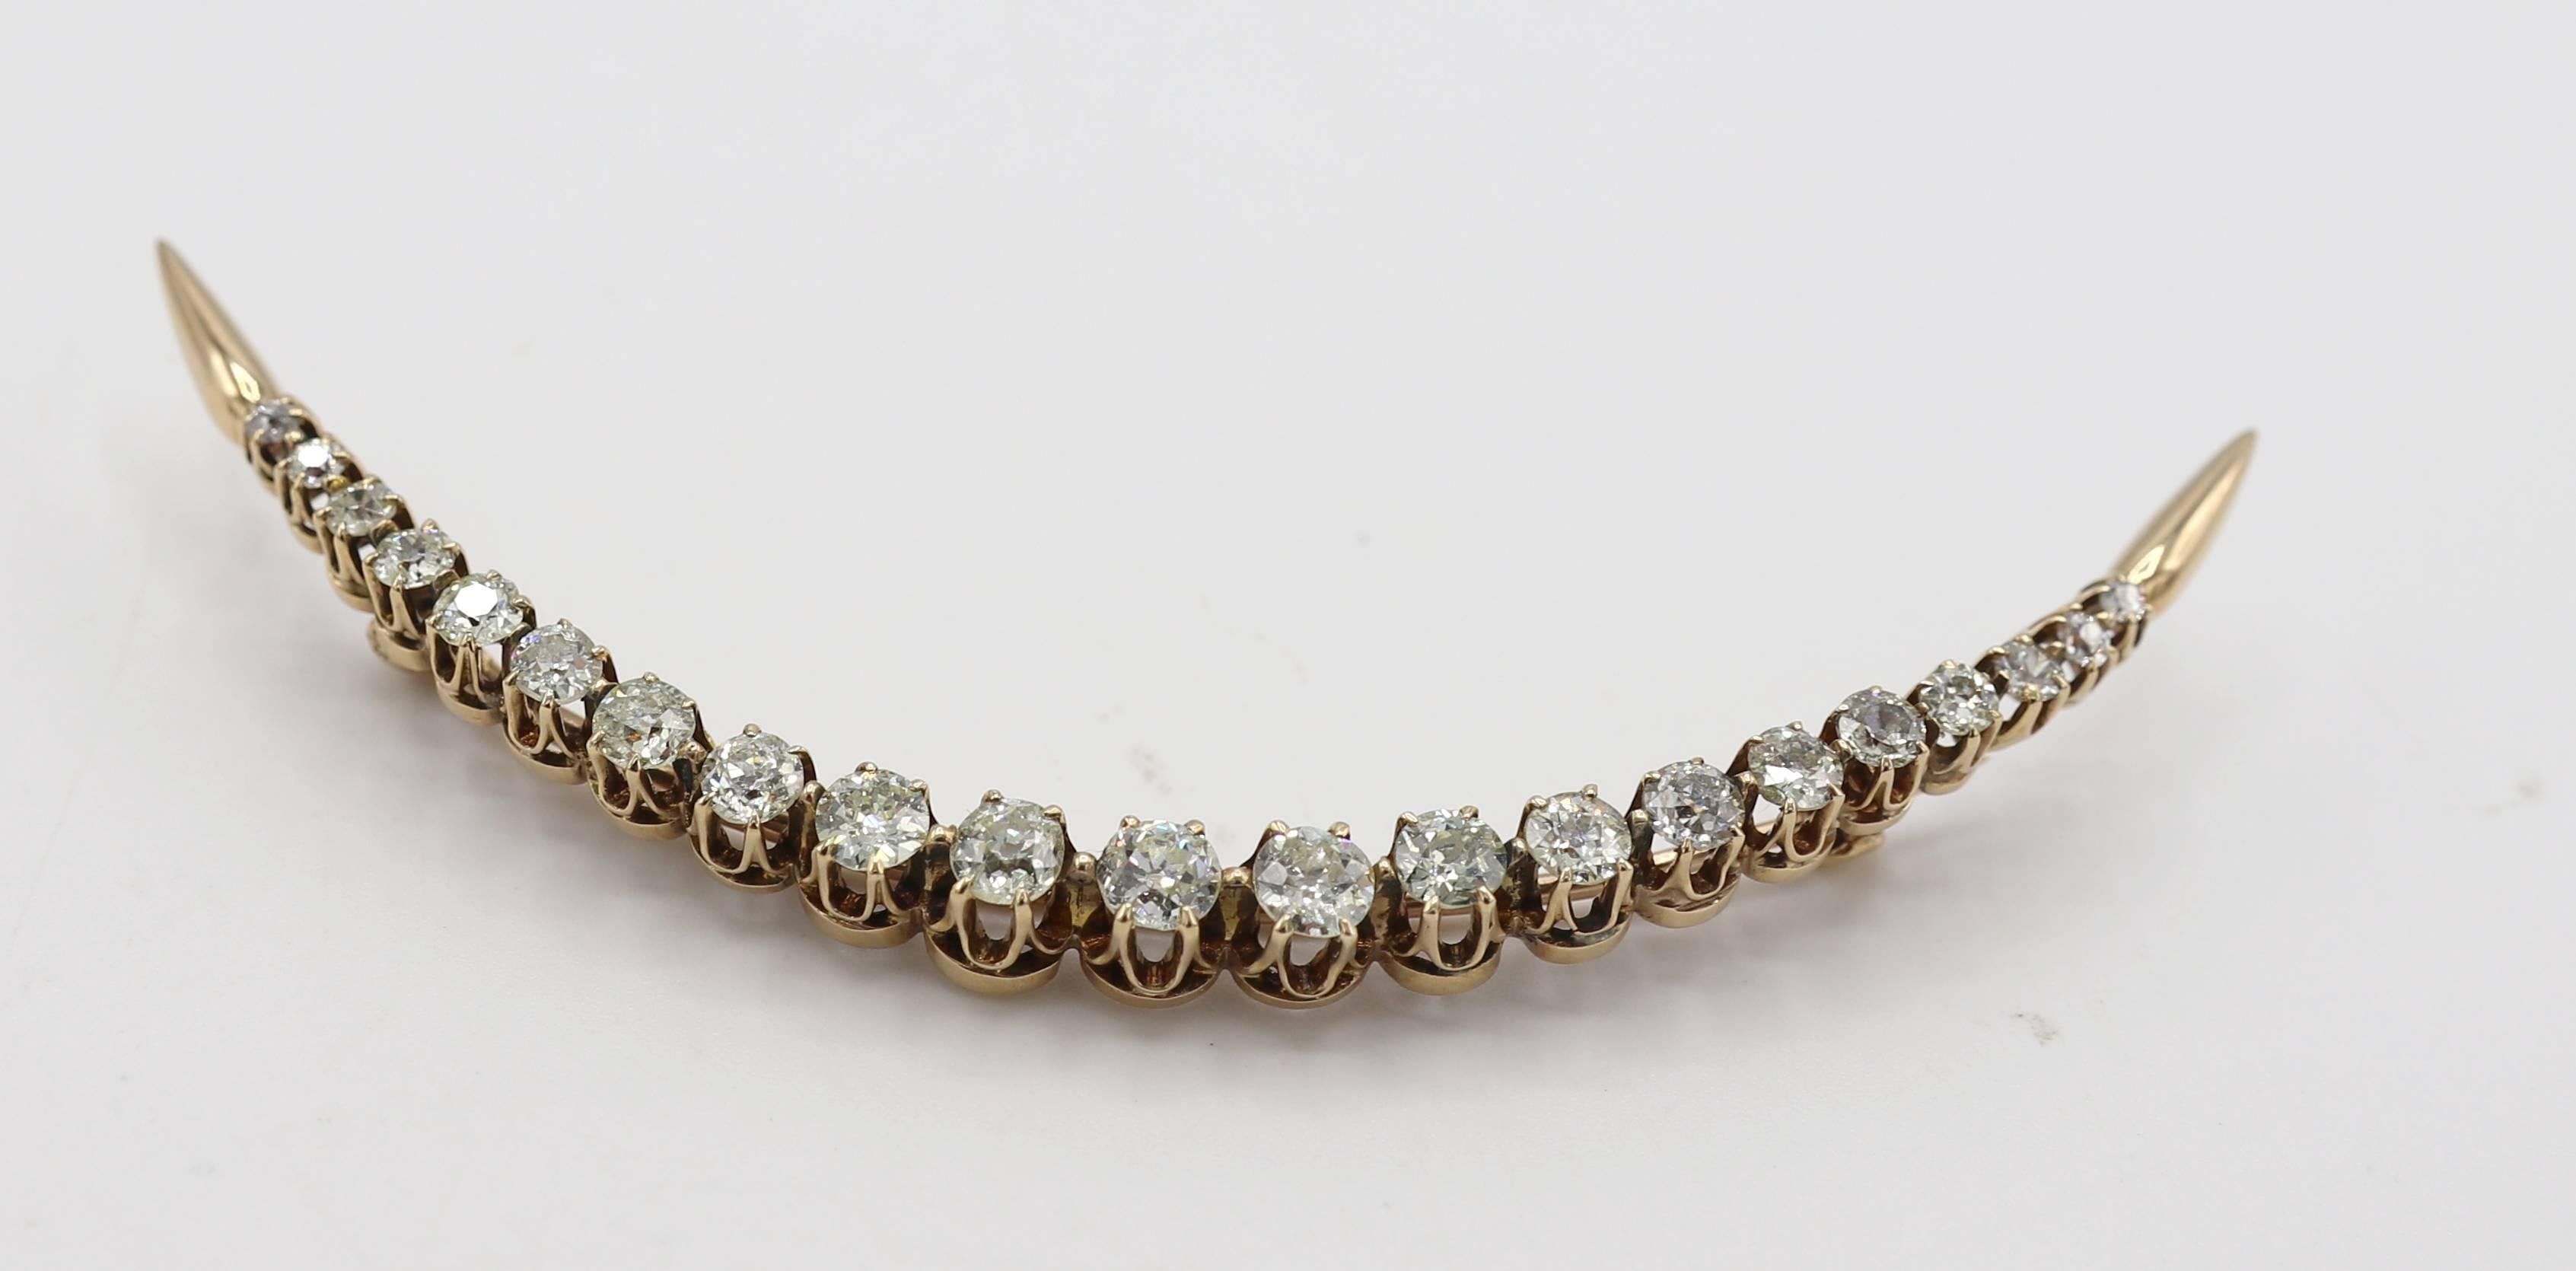 Antique Old European and Mine Cut Diamond Large Crescent Pin Brooch 
Metal: 14k yellow gold
Weight: 8.44 grams
Diamonds: Approx. 2.25 CTW old European & mine cut diamonds L-M SI
Length: 3.25 inches
